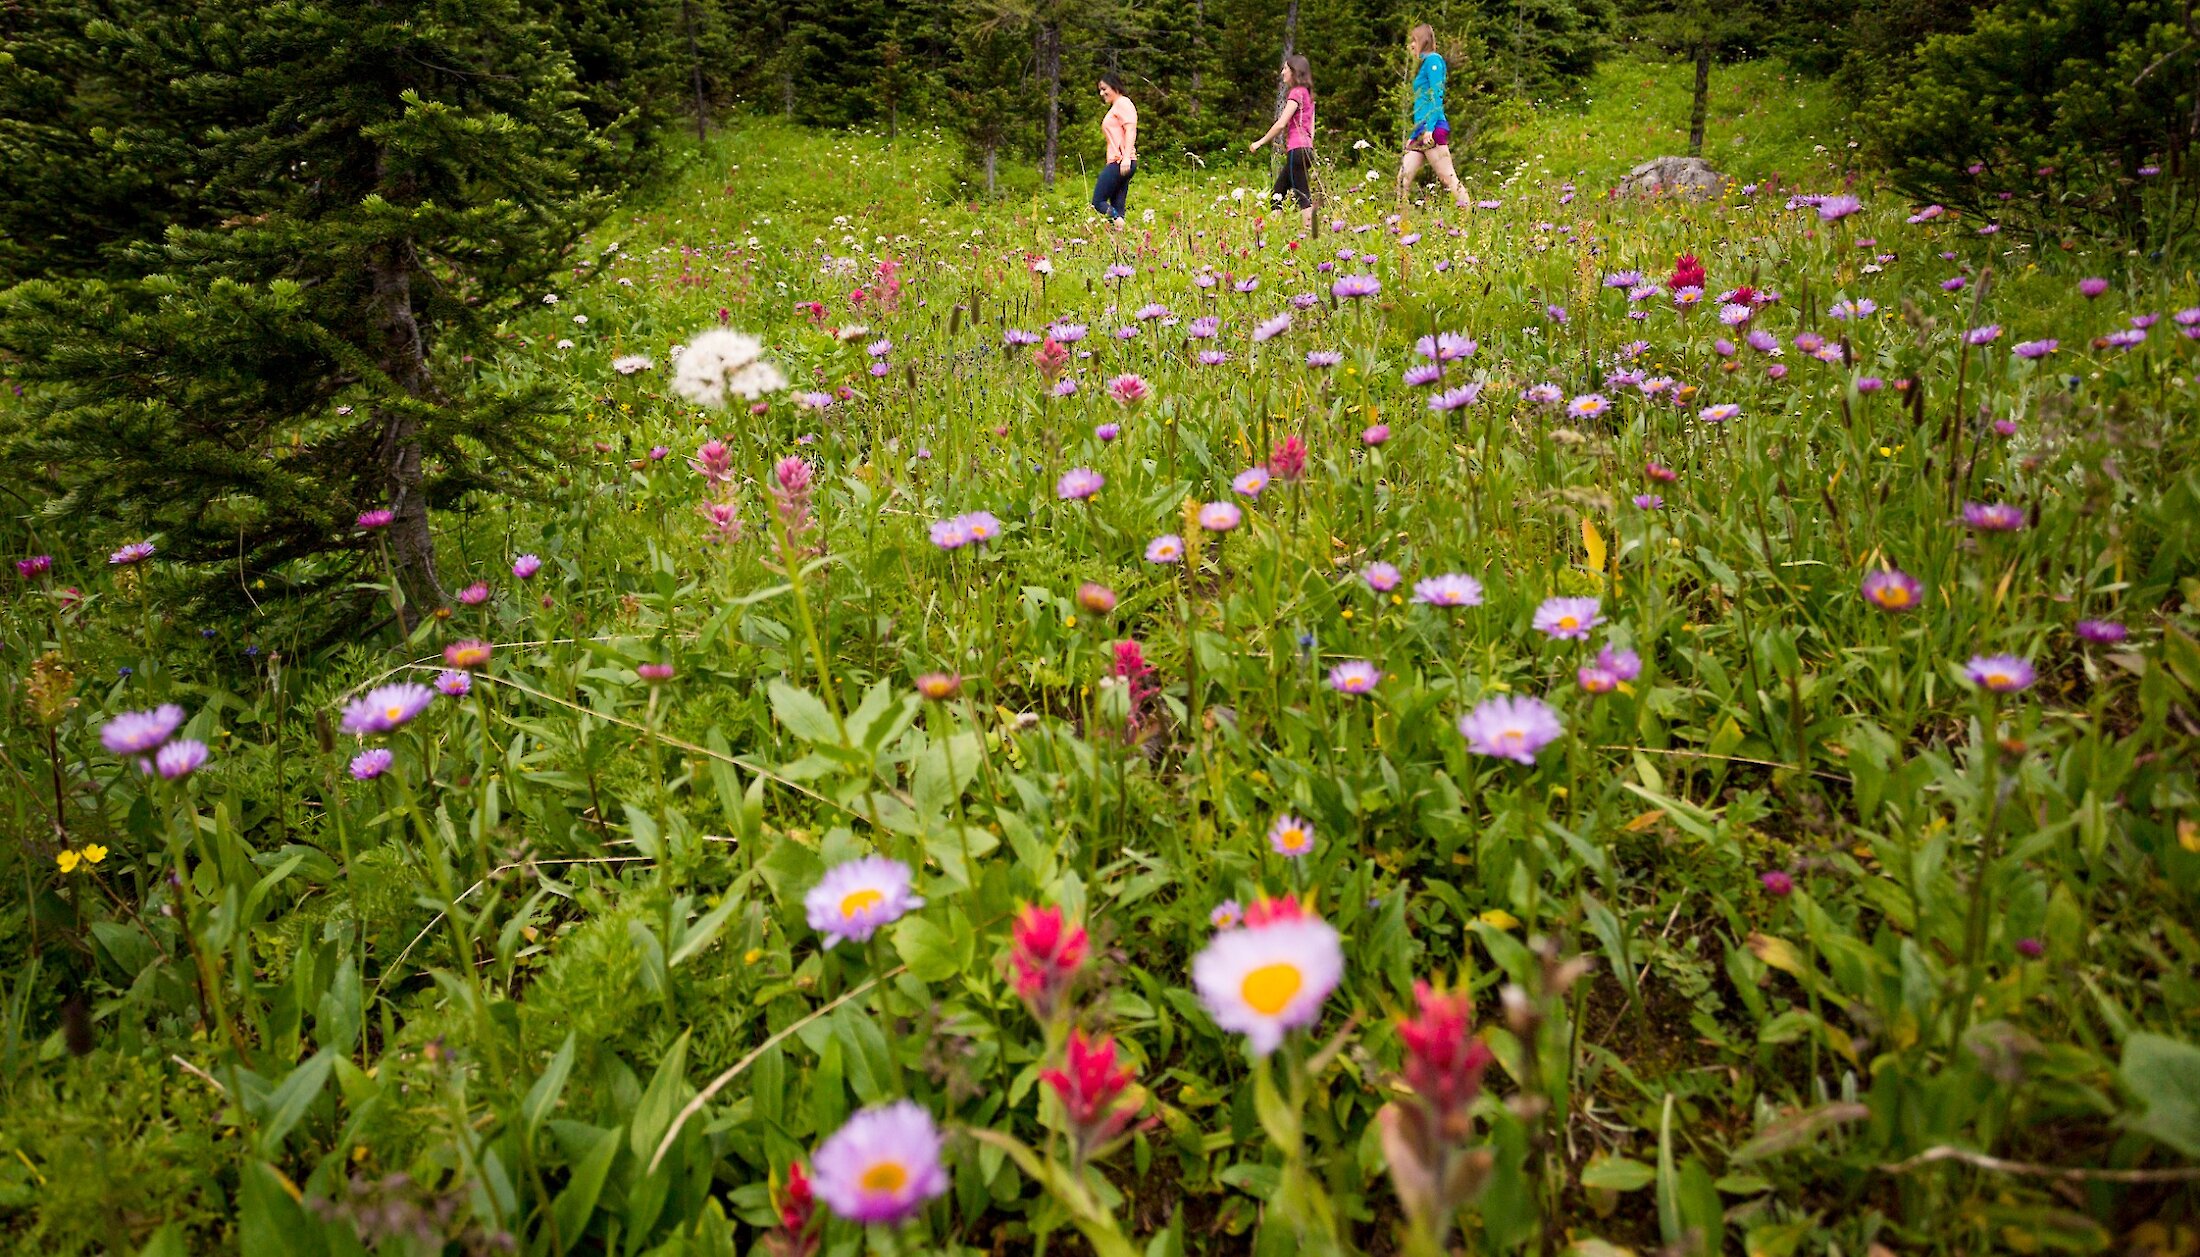 Wild flowers galore at Sunshine Meadows